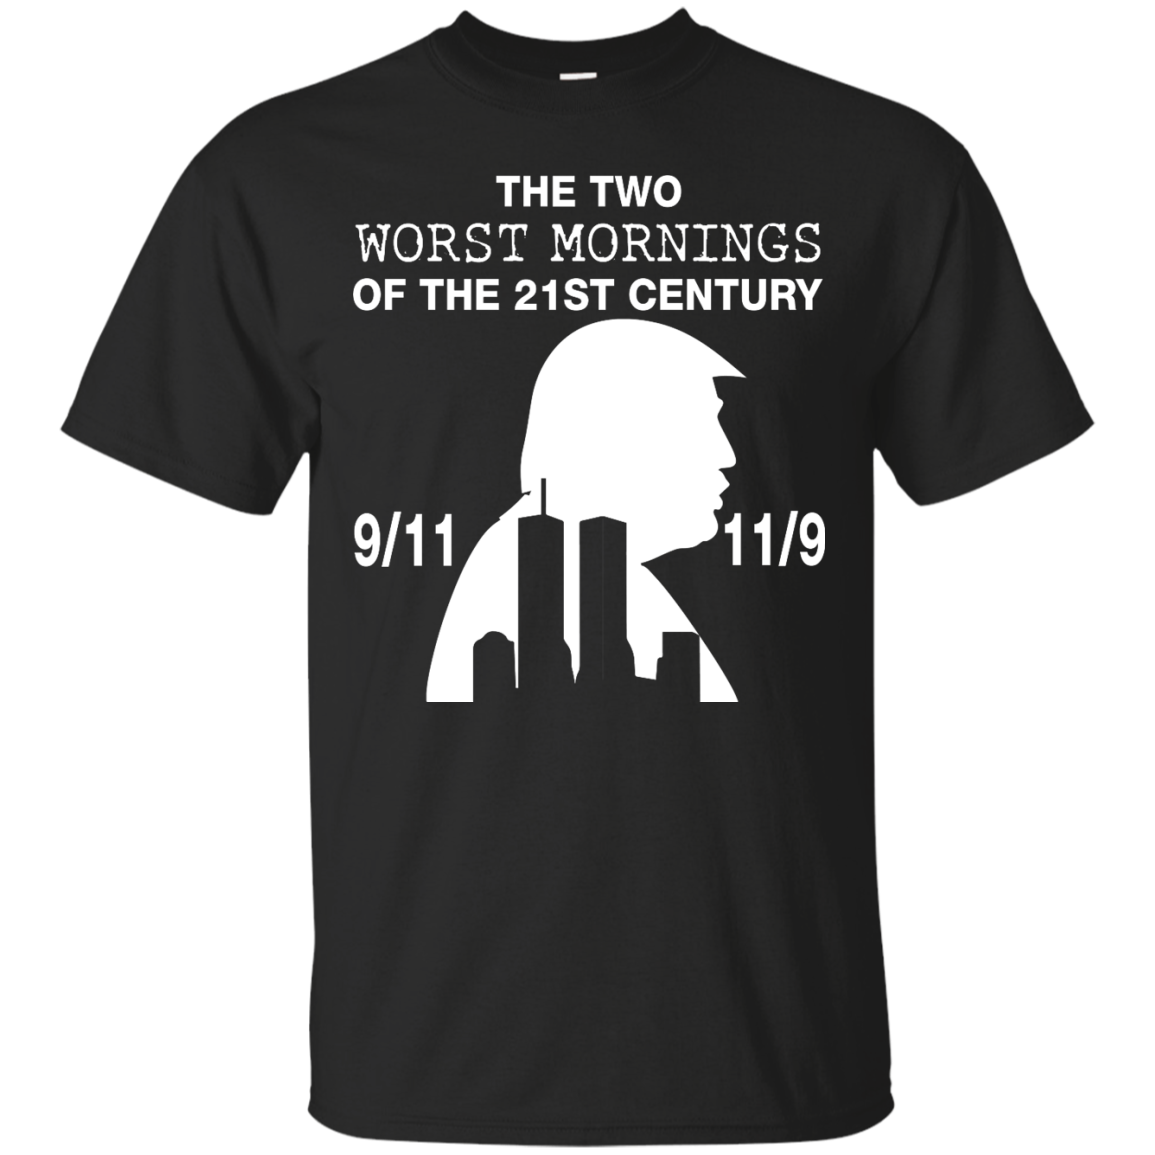 The two worst mornings of the 21st century t-shirt, hoodie, tank